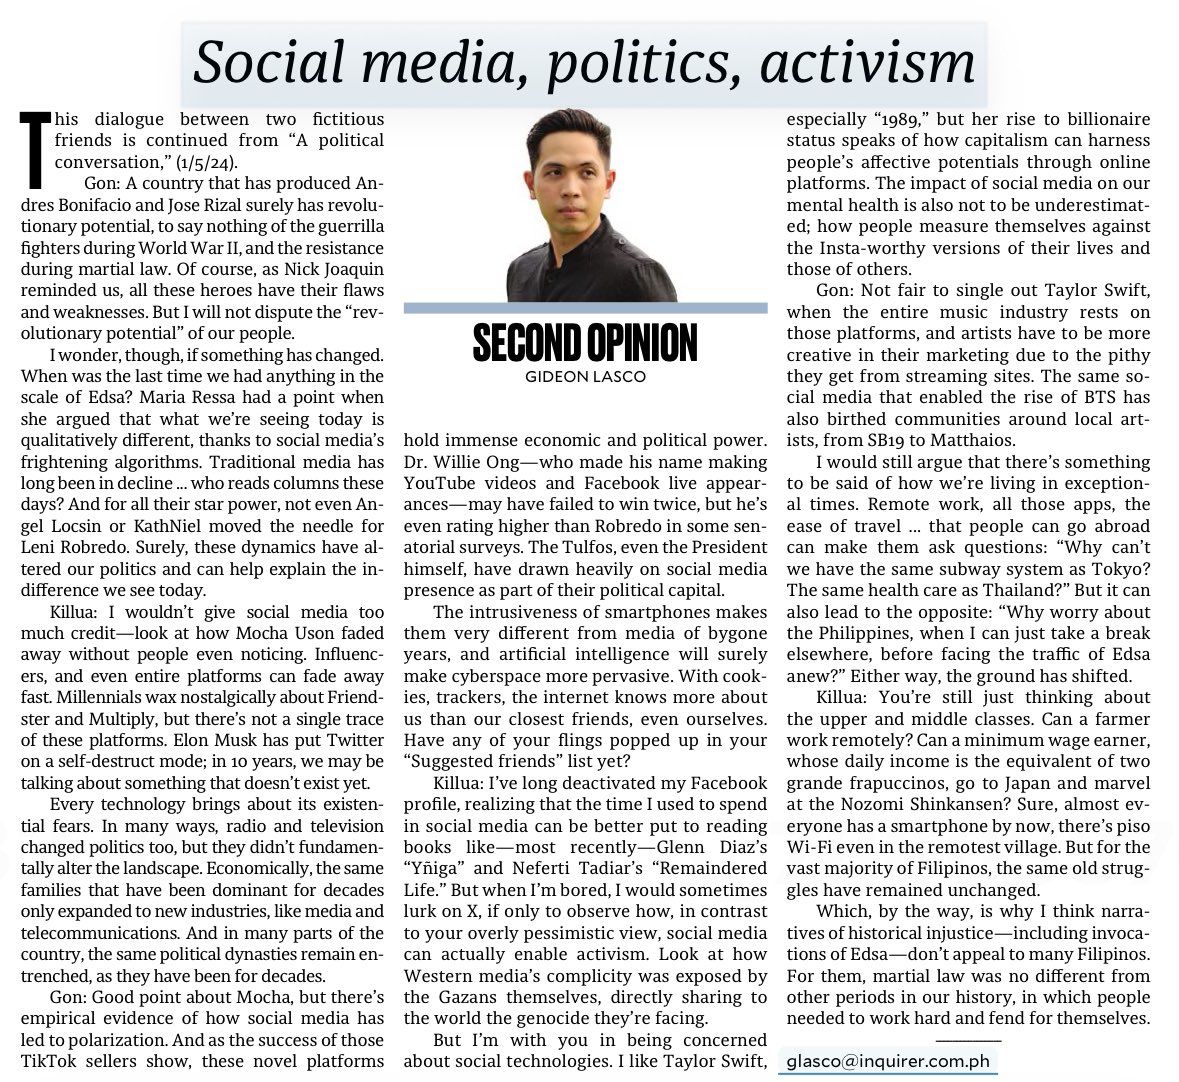 My column today continues an imaginary conversation about politics in the Philippines, particularly the role of social media and technology in activism: